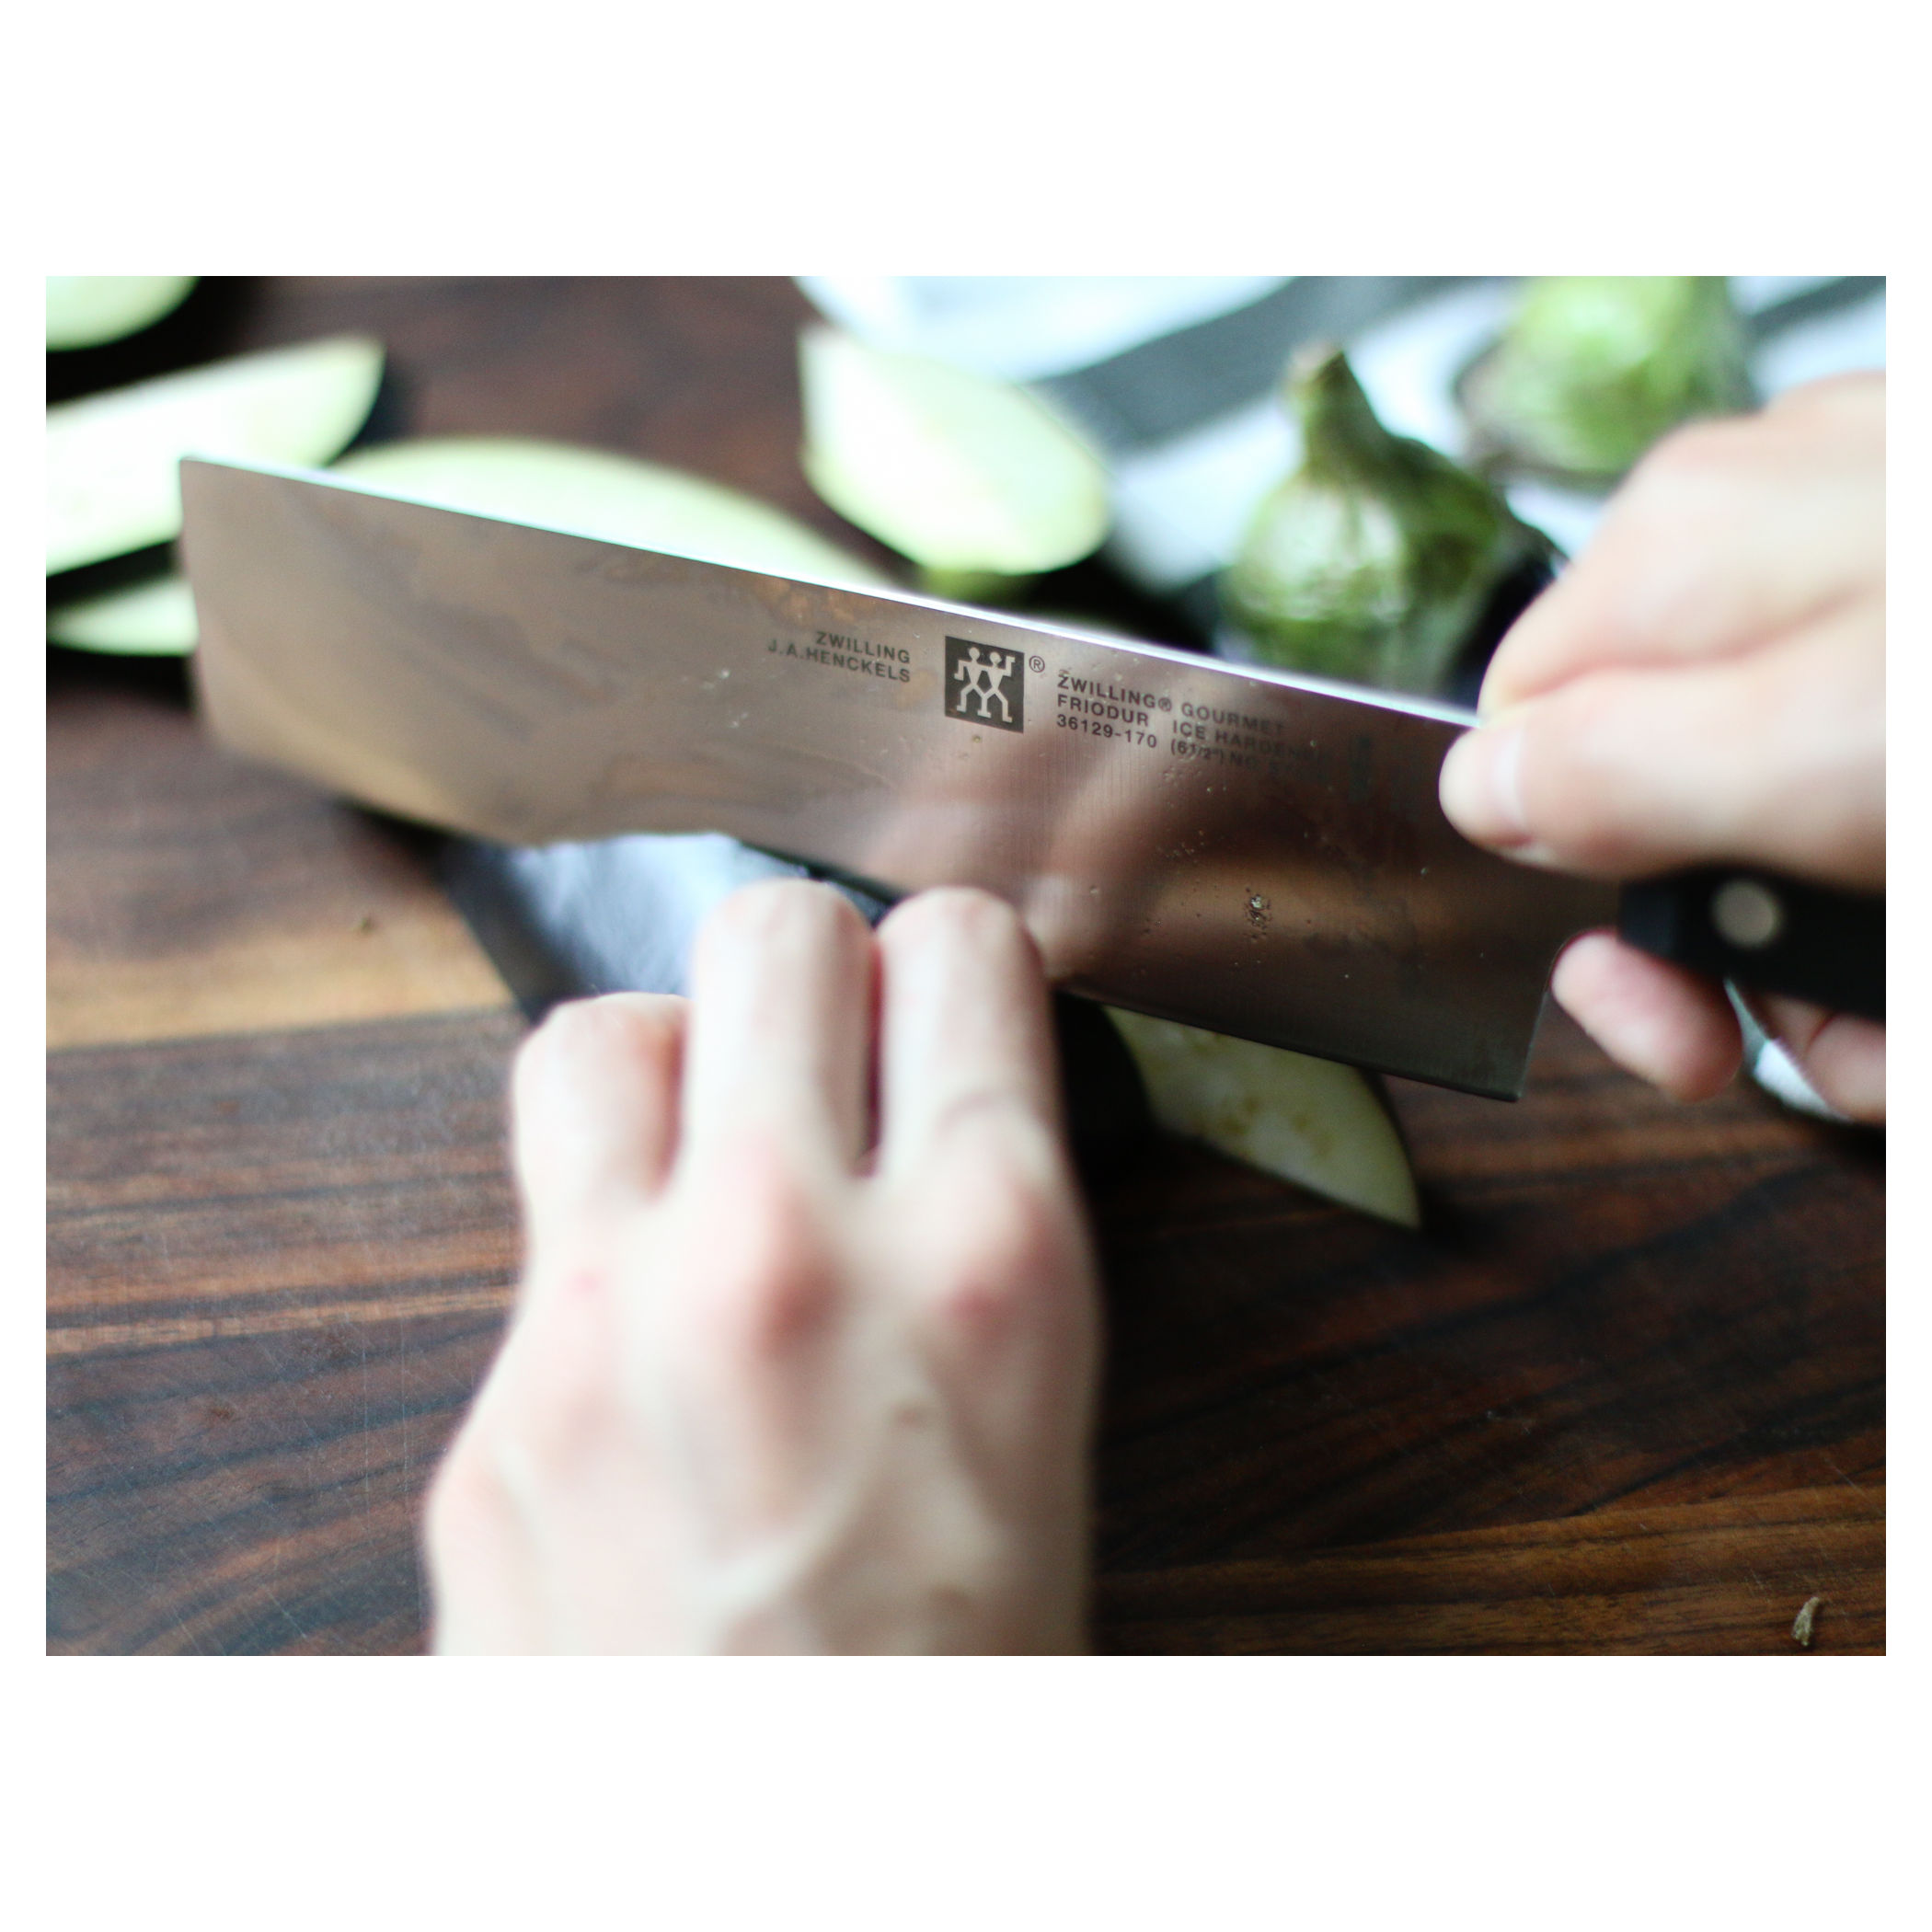 ZWILLING Gourmet 3-inch Vegetable Knife